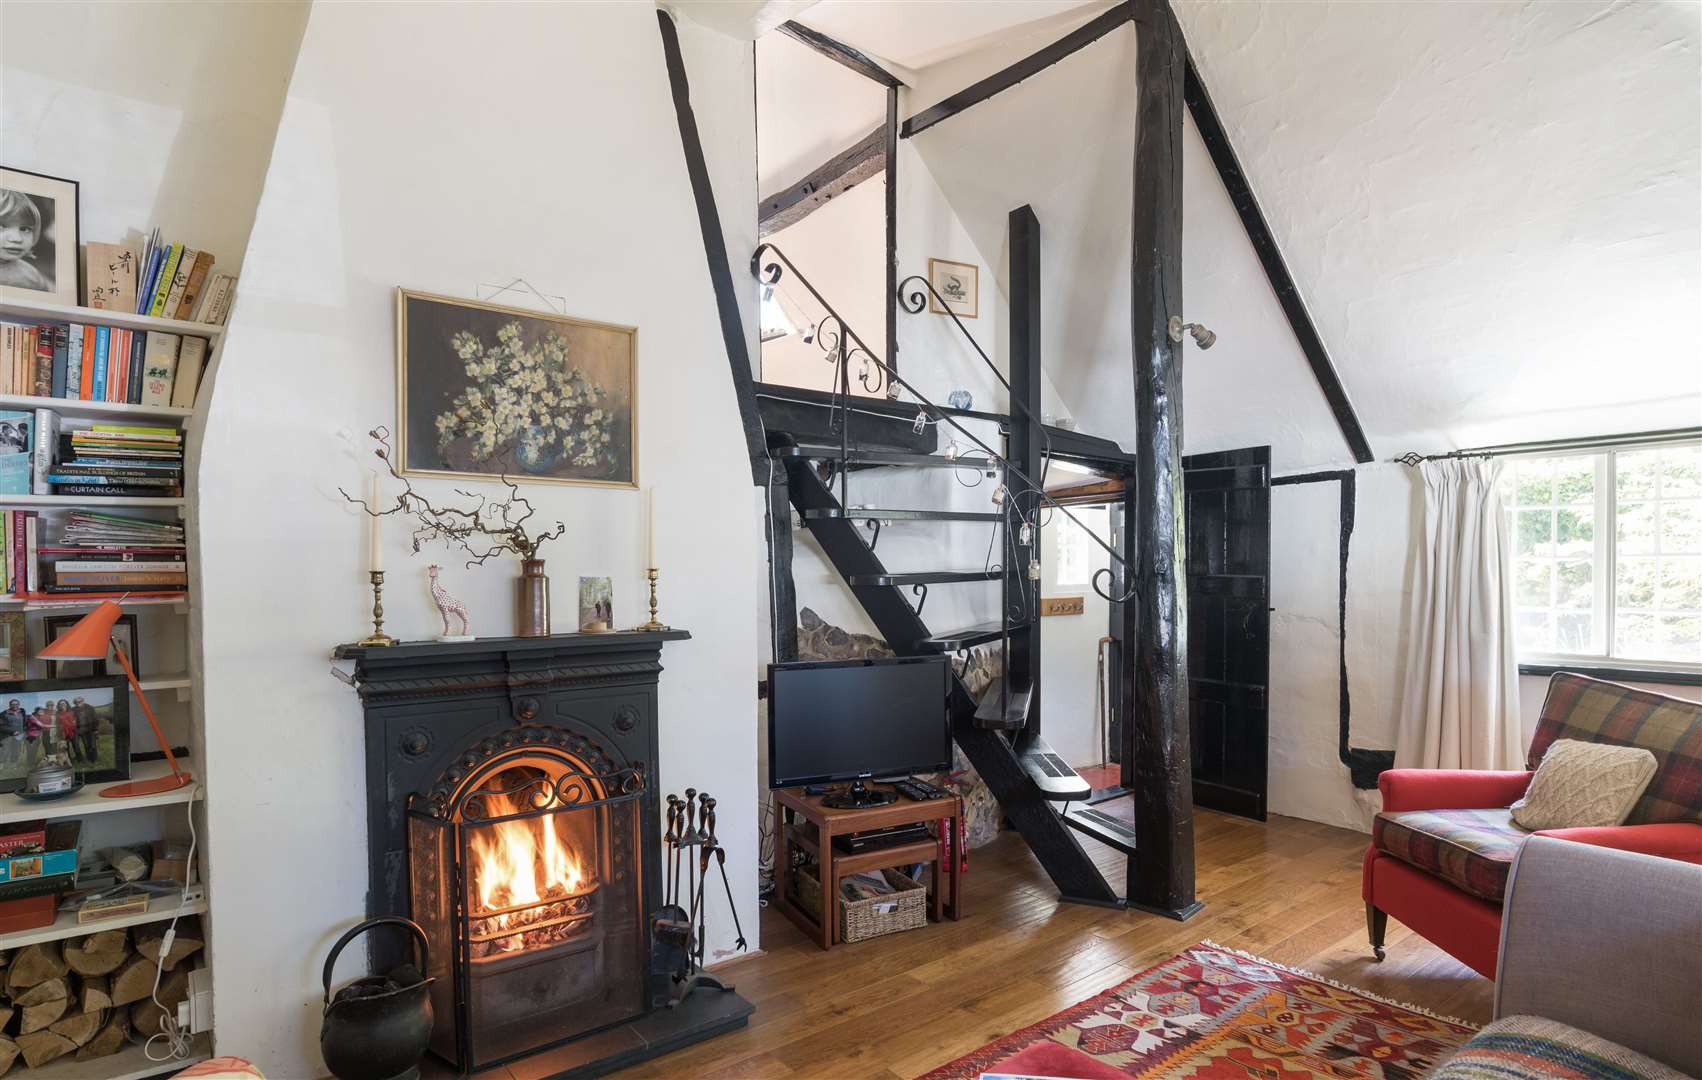 There's a quirky staircase and polished floorboards at Dormer Cottage